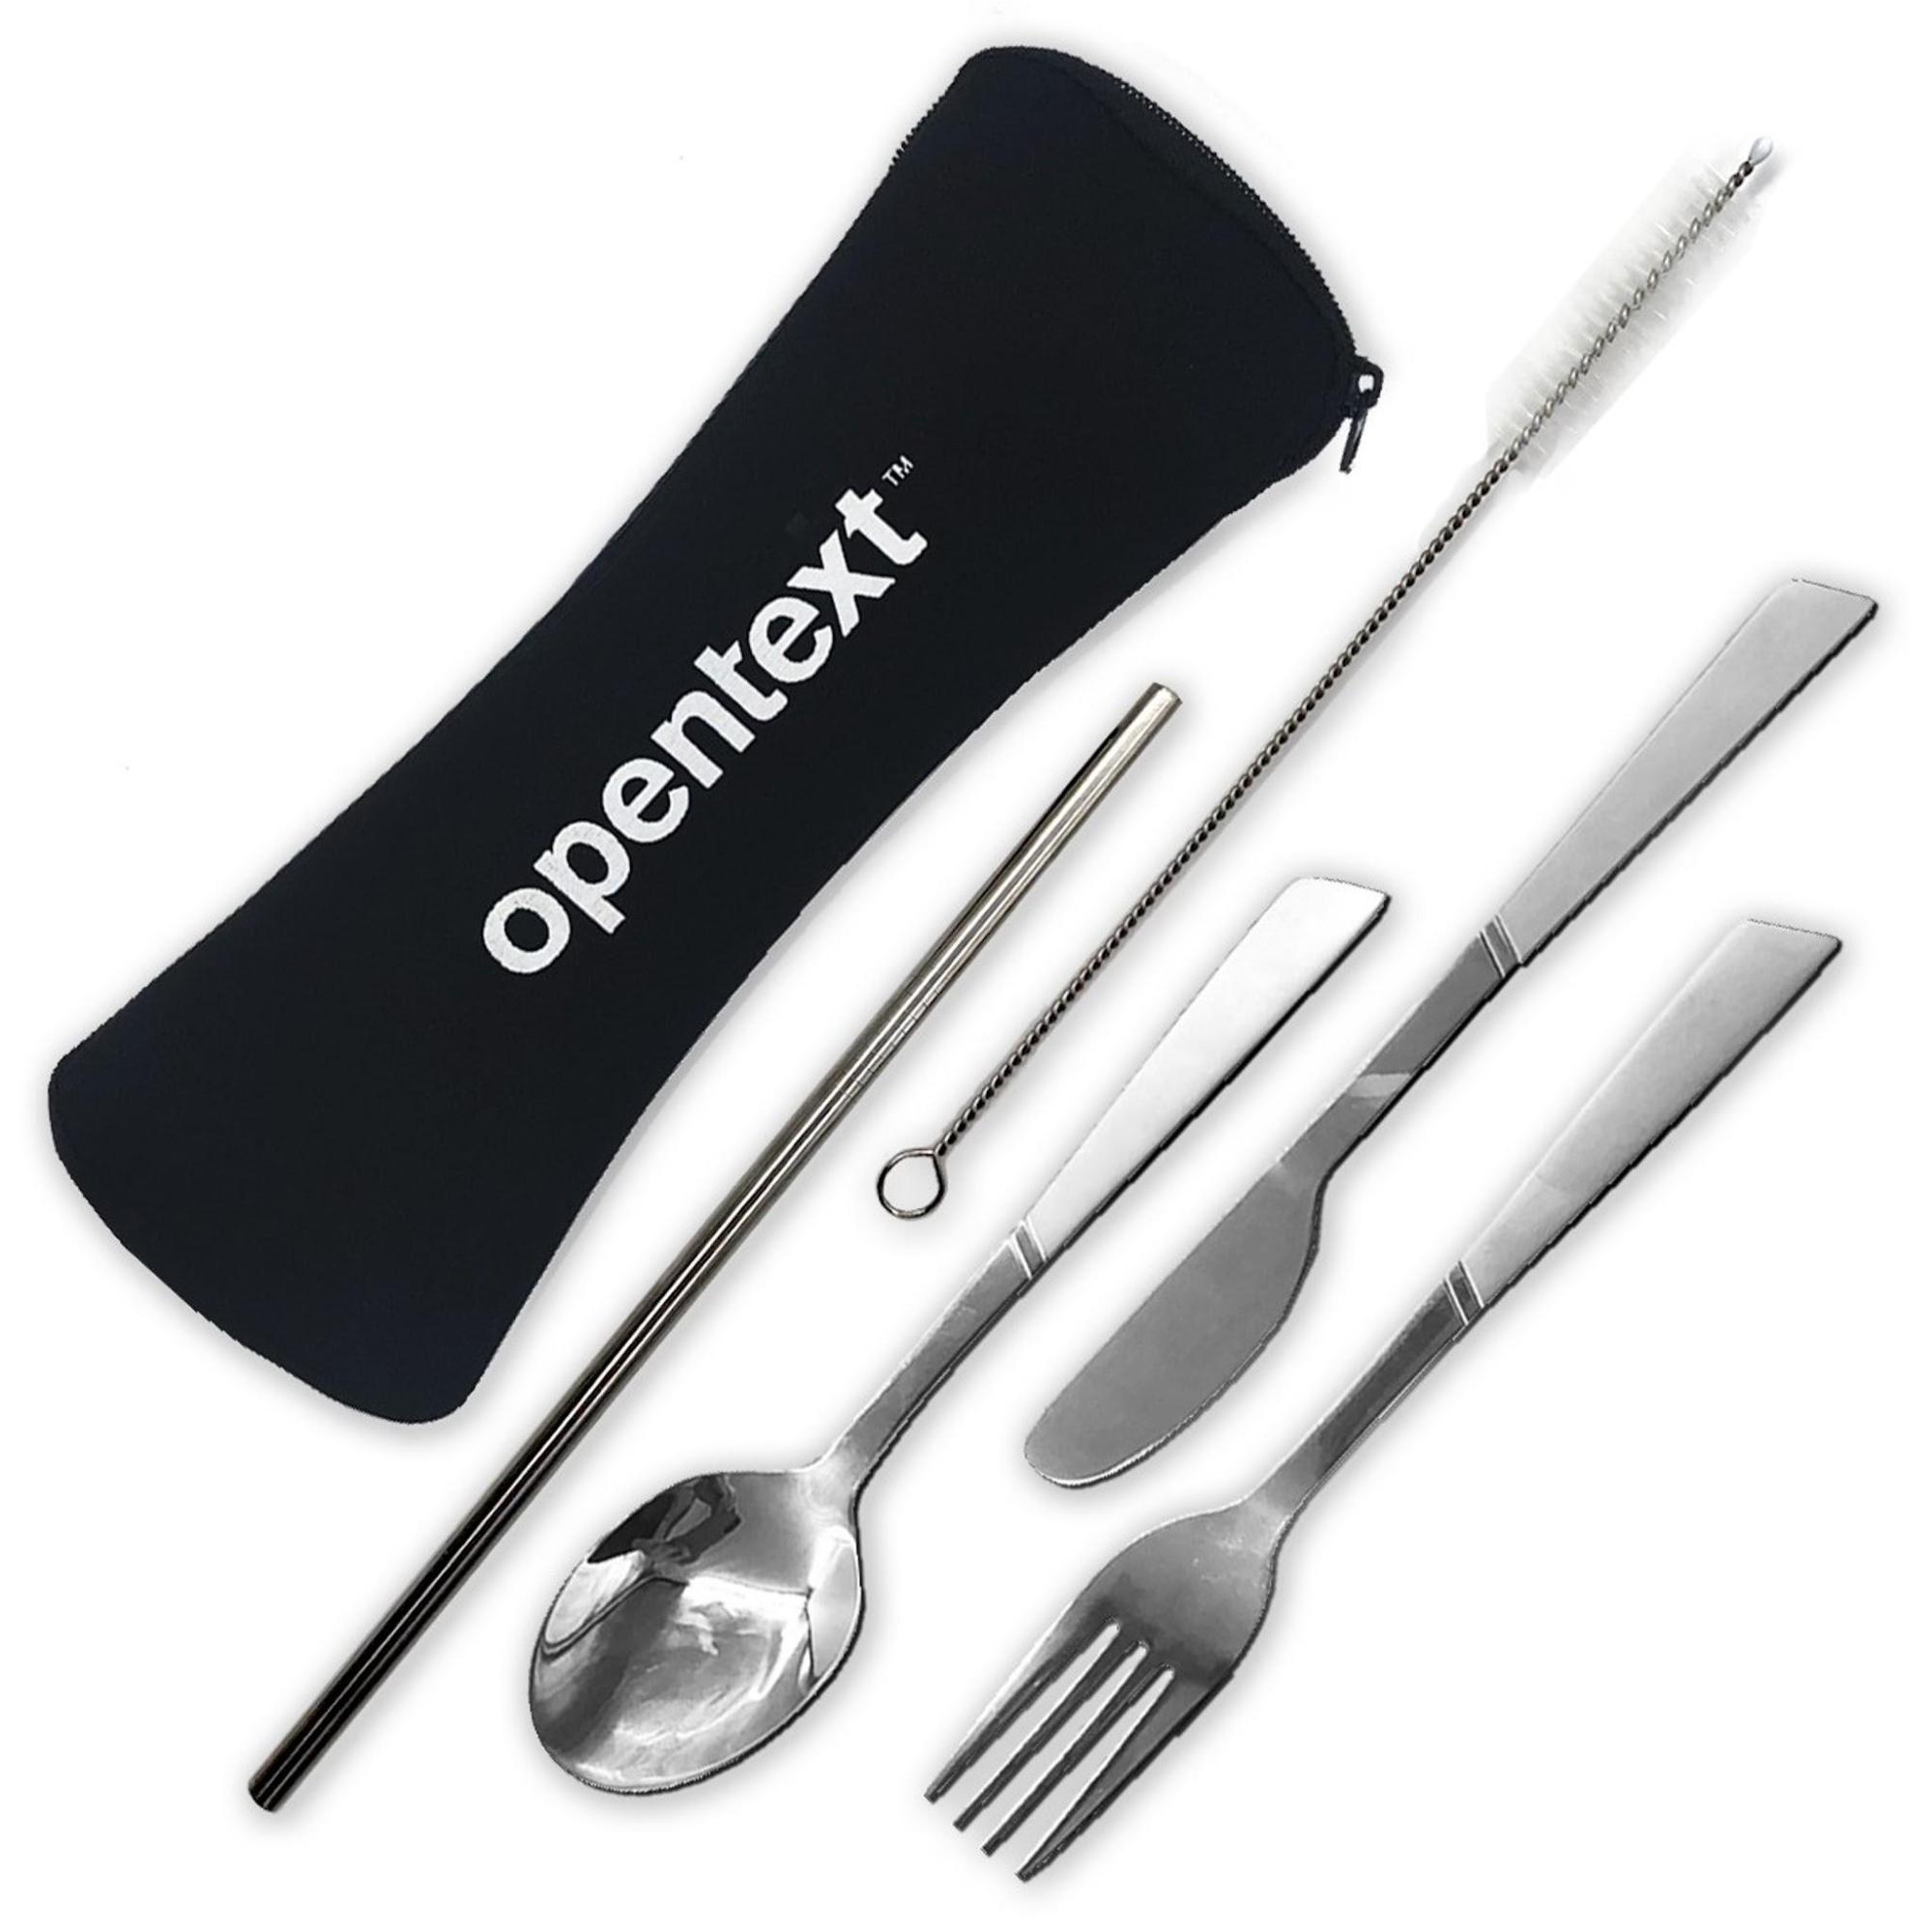 Stainless Steel Utensils & Straw swag items